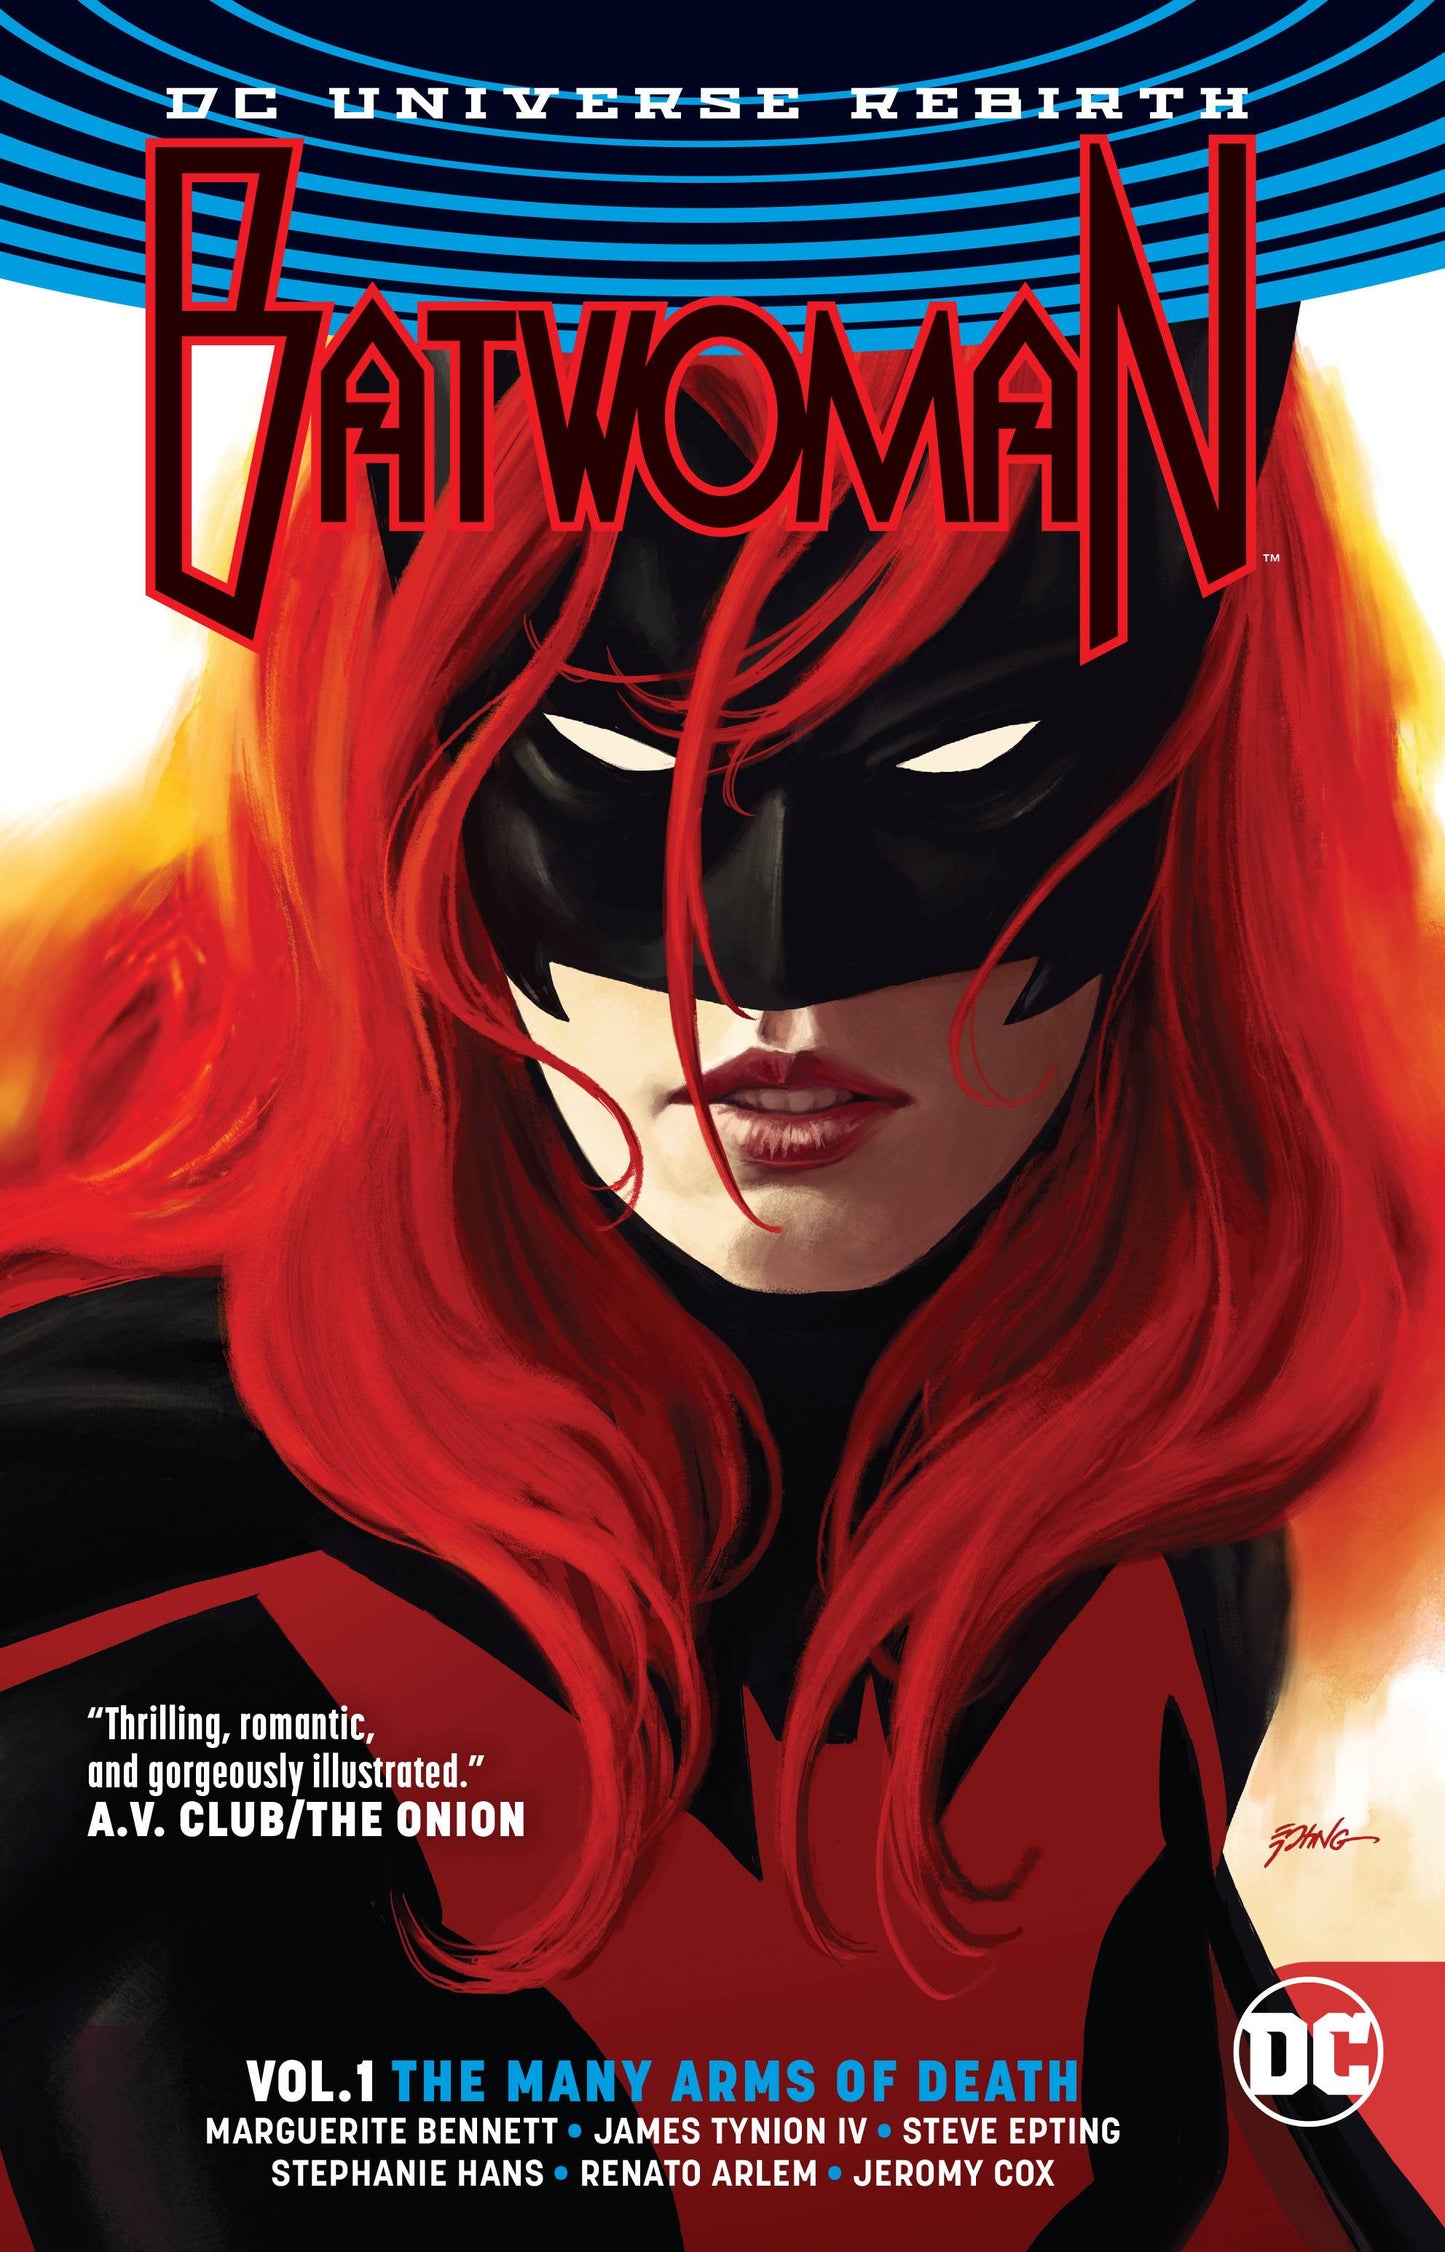 Batwoman Vol. 01 The Many Arms Of Death (Rebirth)